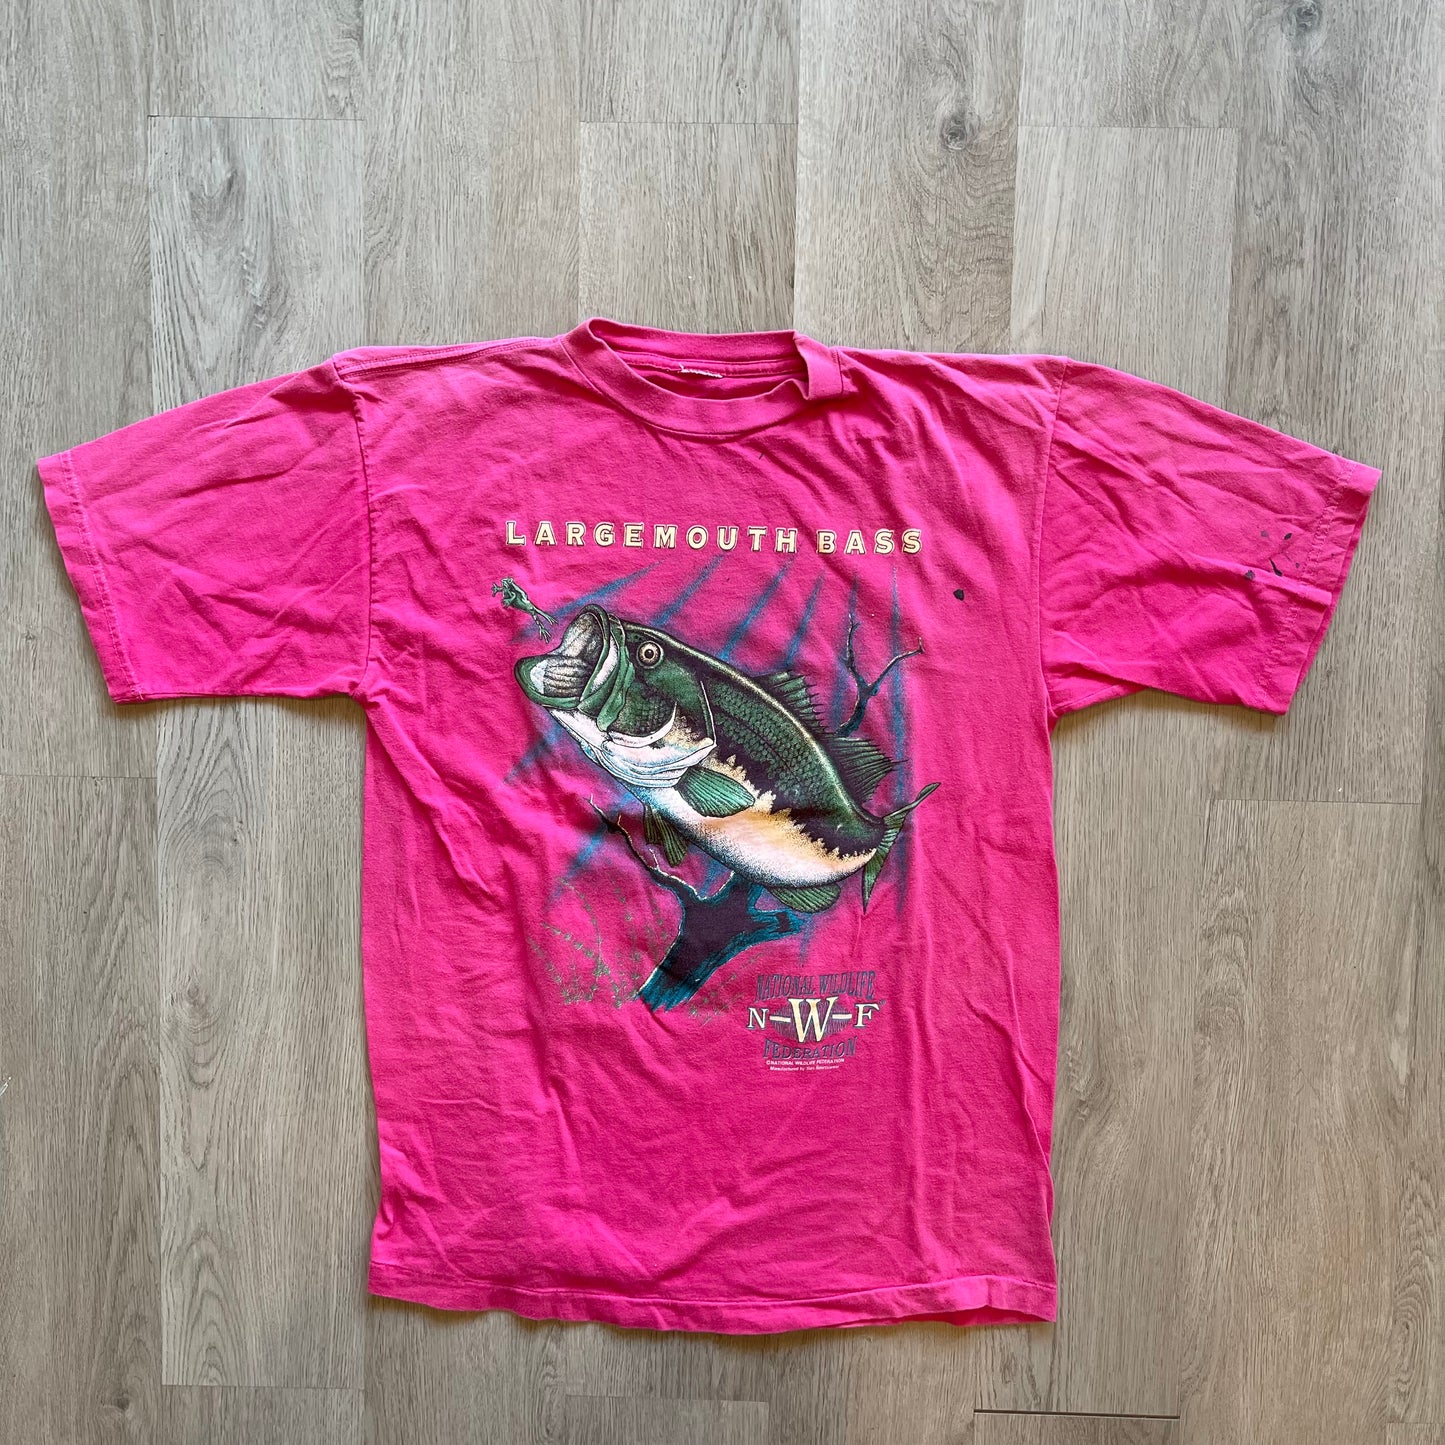 Vintage Large Mouth bass tee shirt